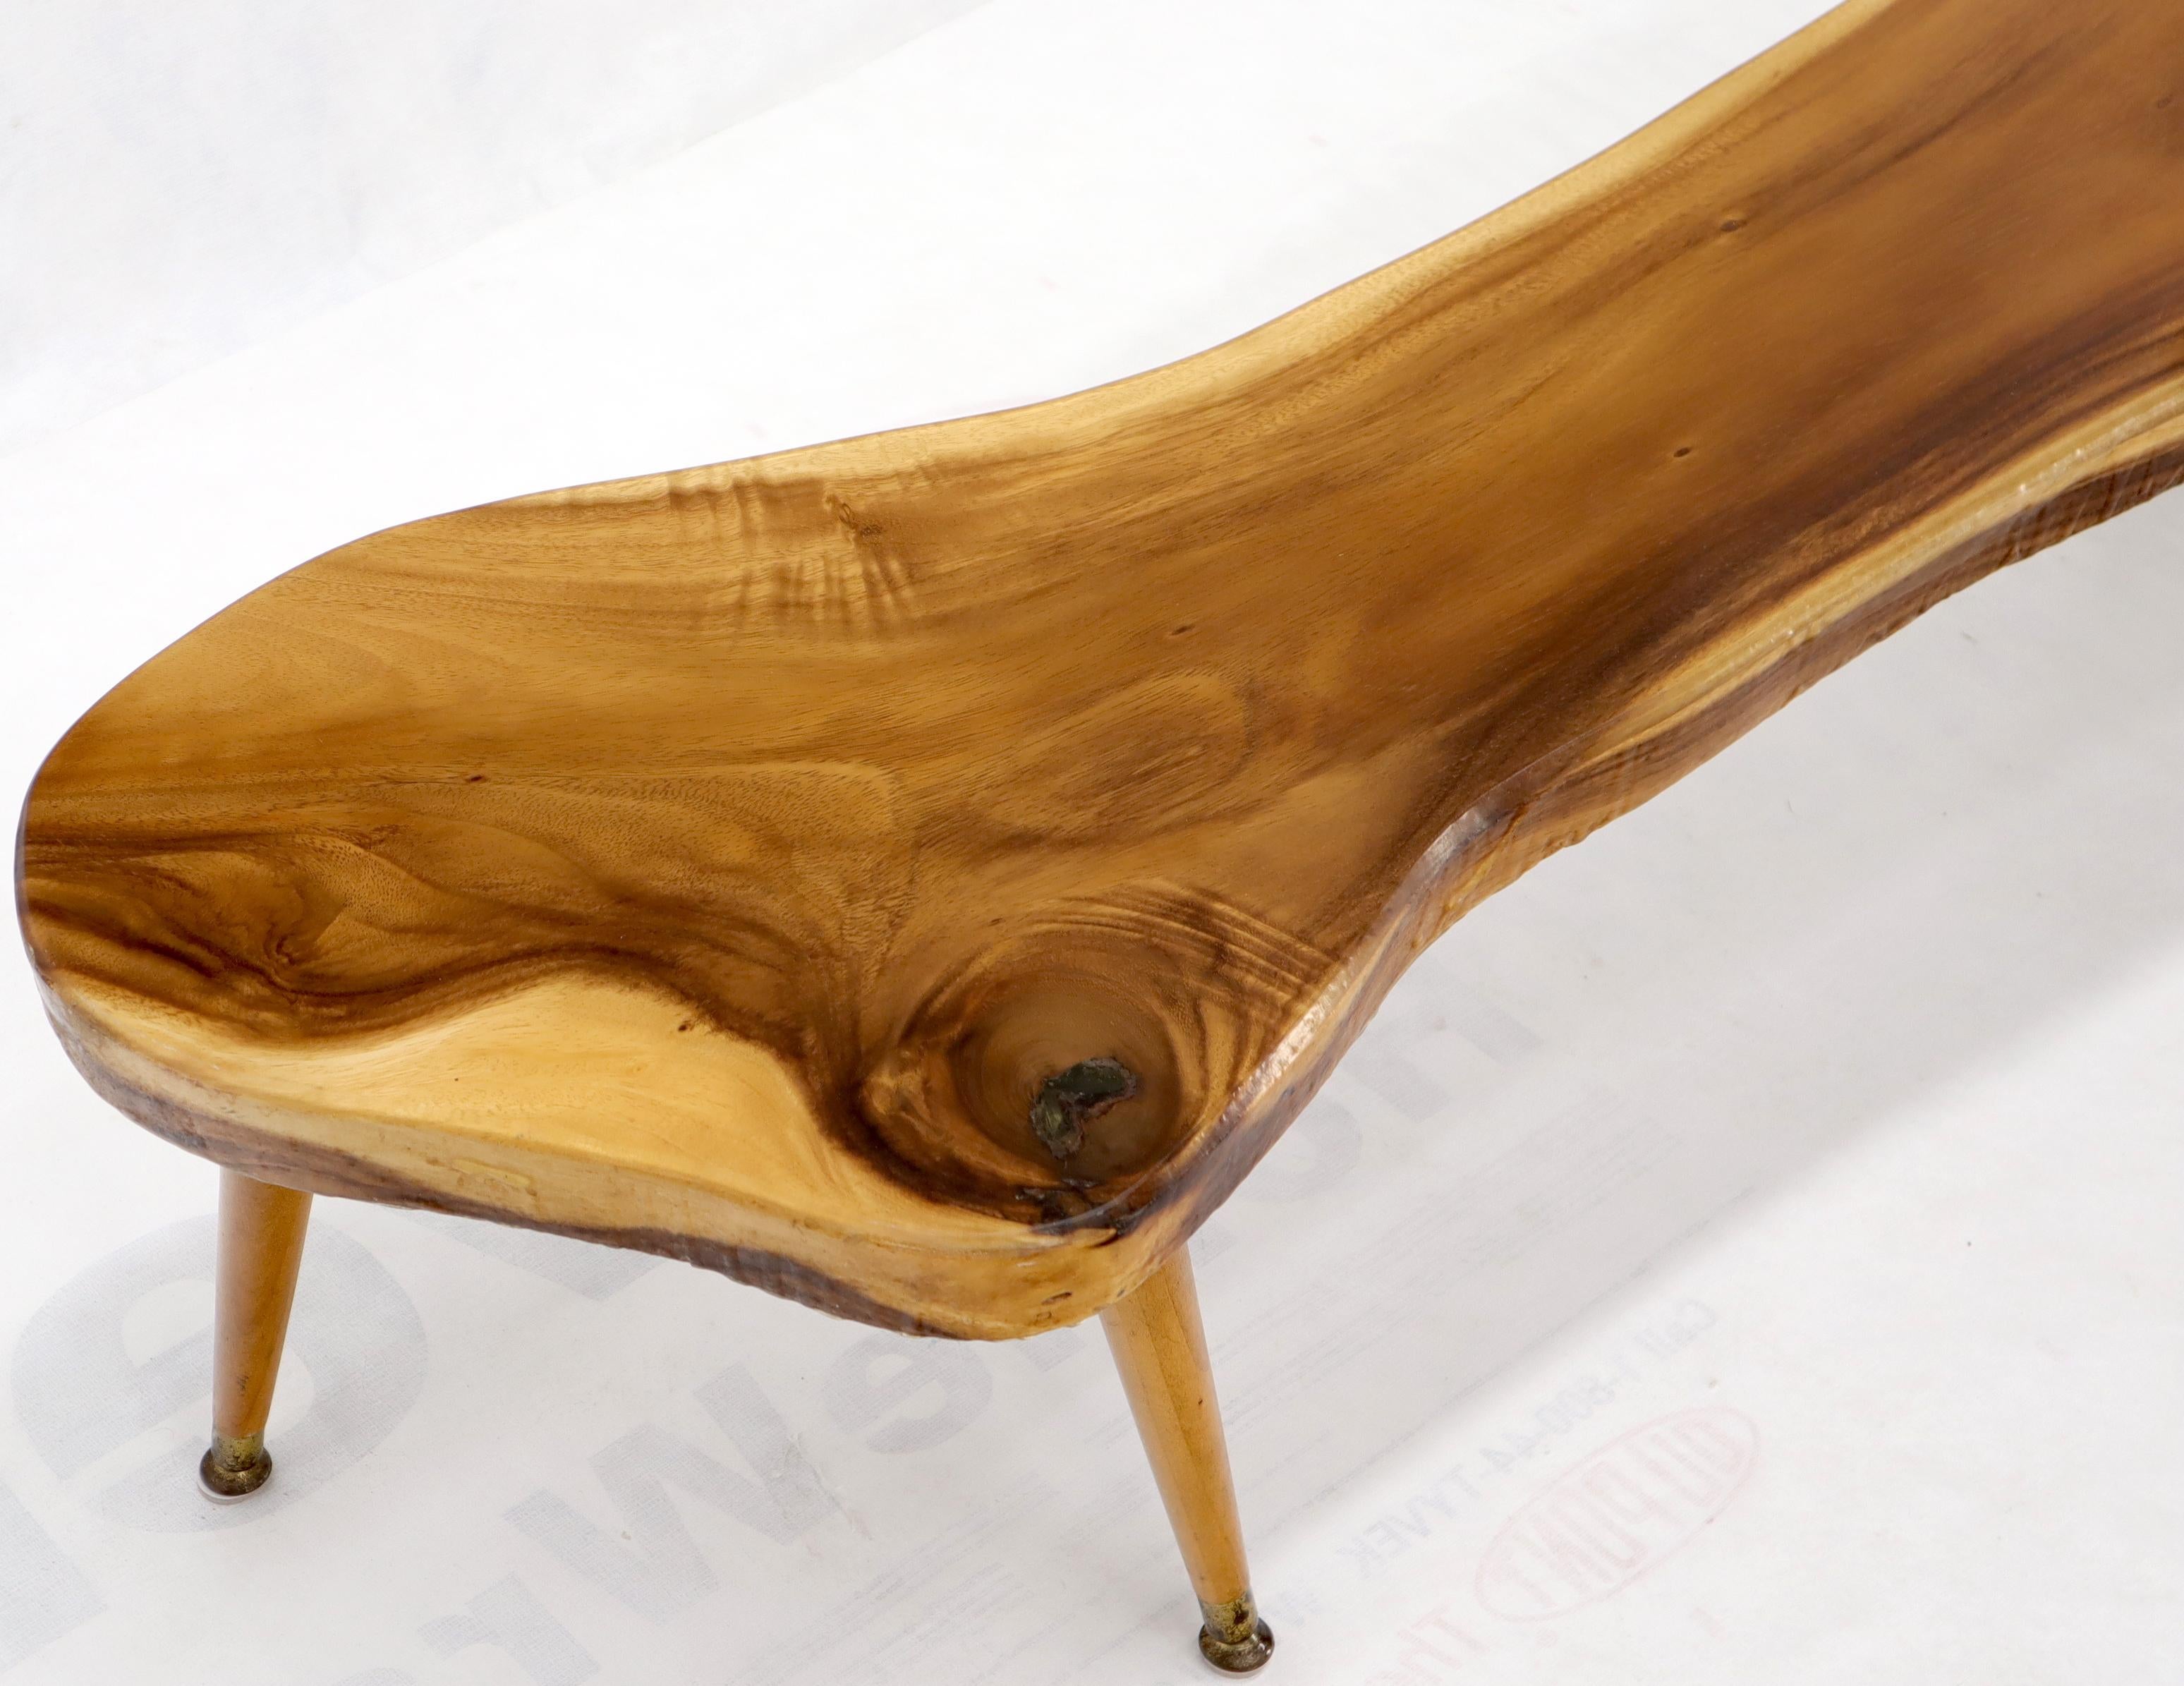 Live Edge Elongated Organic Shape Coffee Table Bench In Good Condition For Sale In Rockaway, NJ